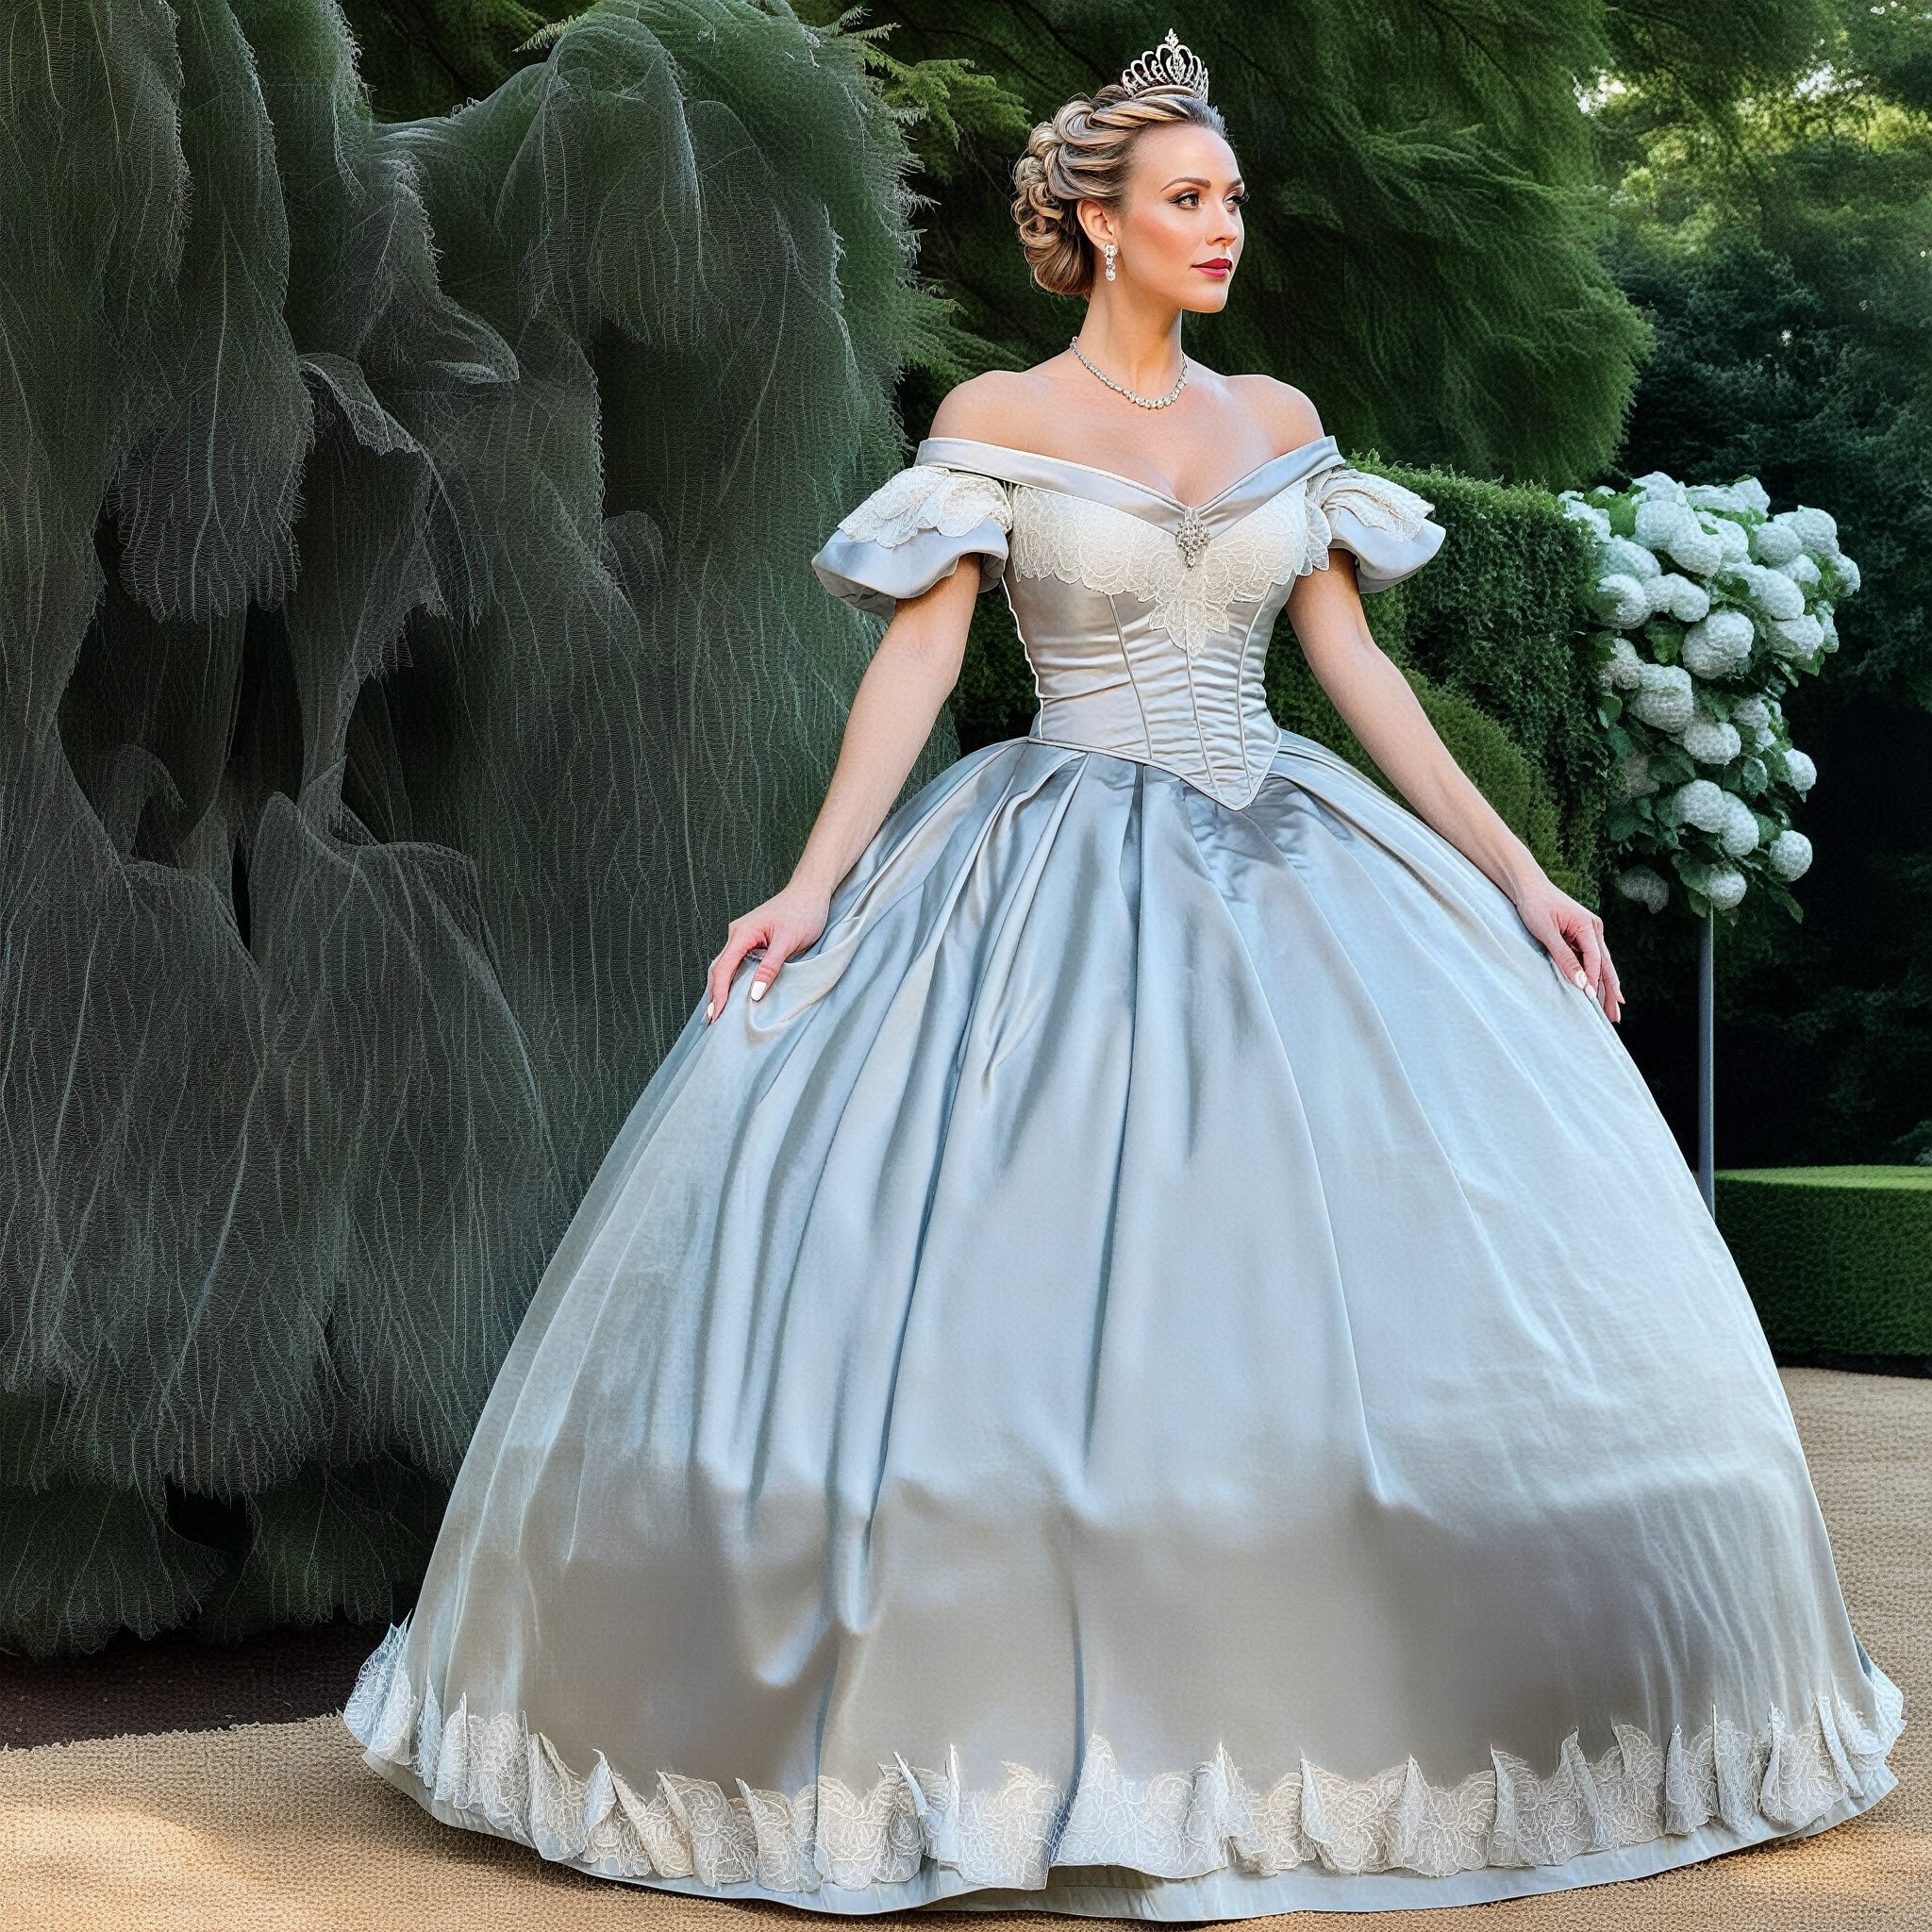 full height photo of beautiful woman, hair in updo with tiara, in formal victorian garden, wearing silver satin gown with ruffles and lace, romantic lighting,hoopdress,r